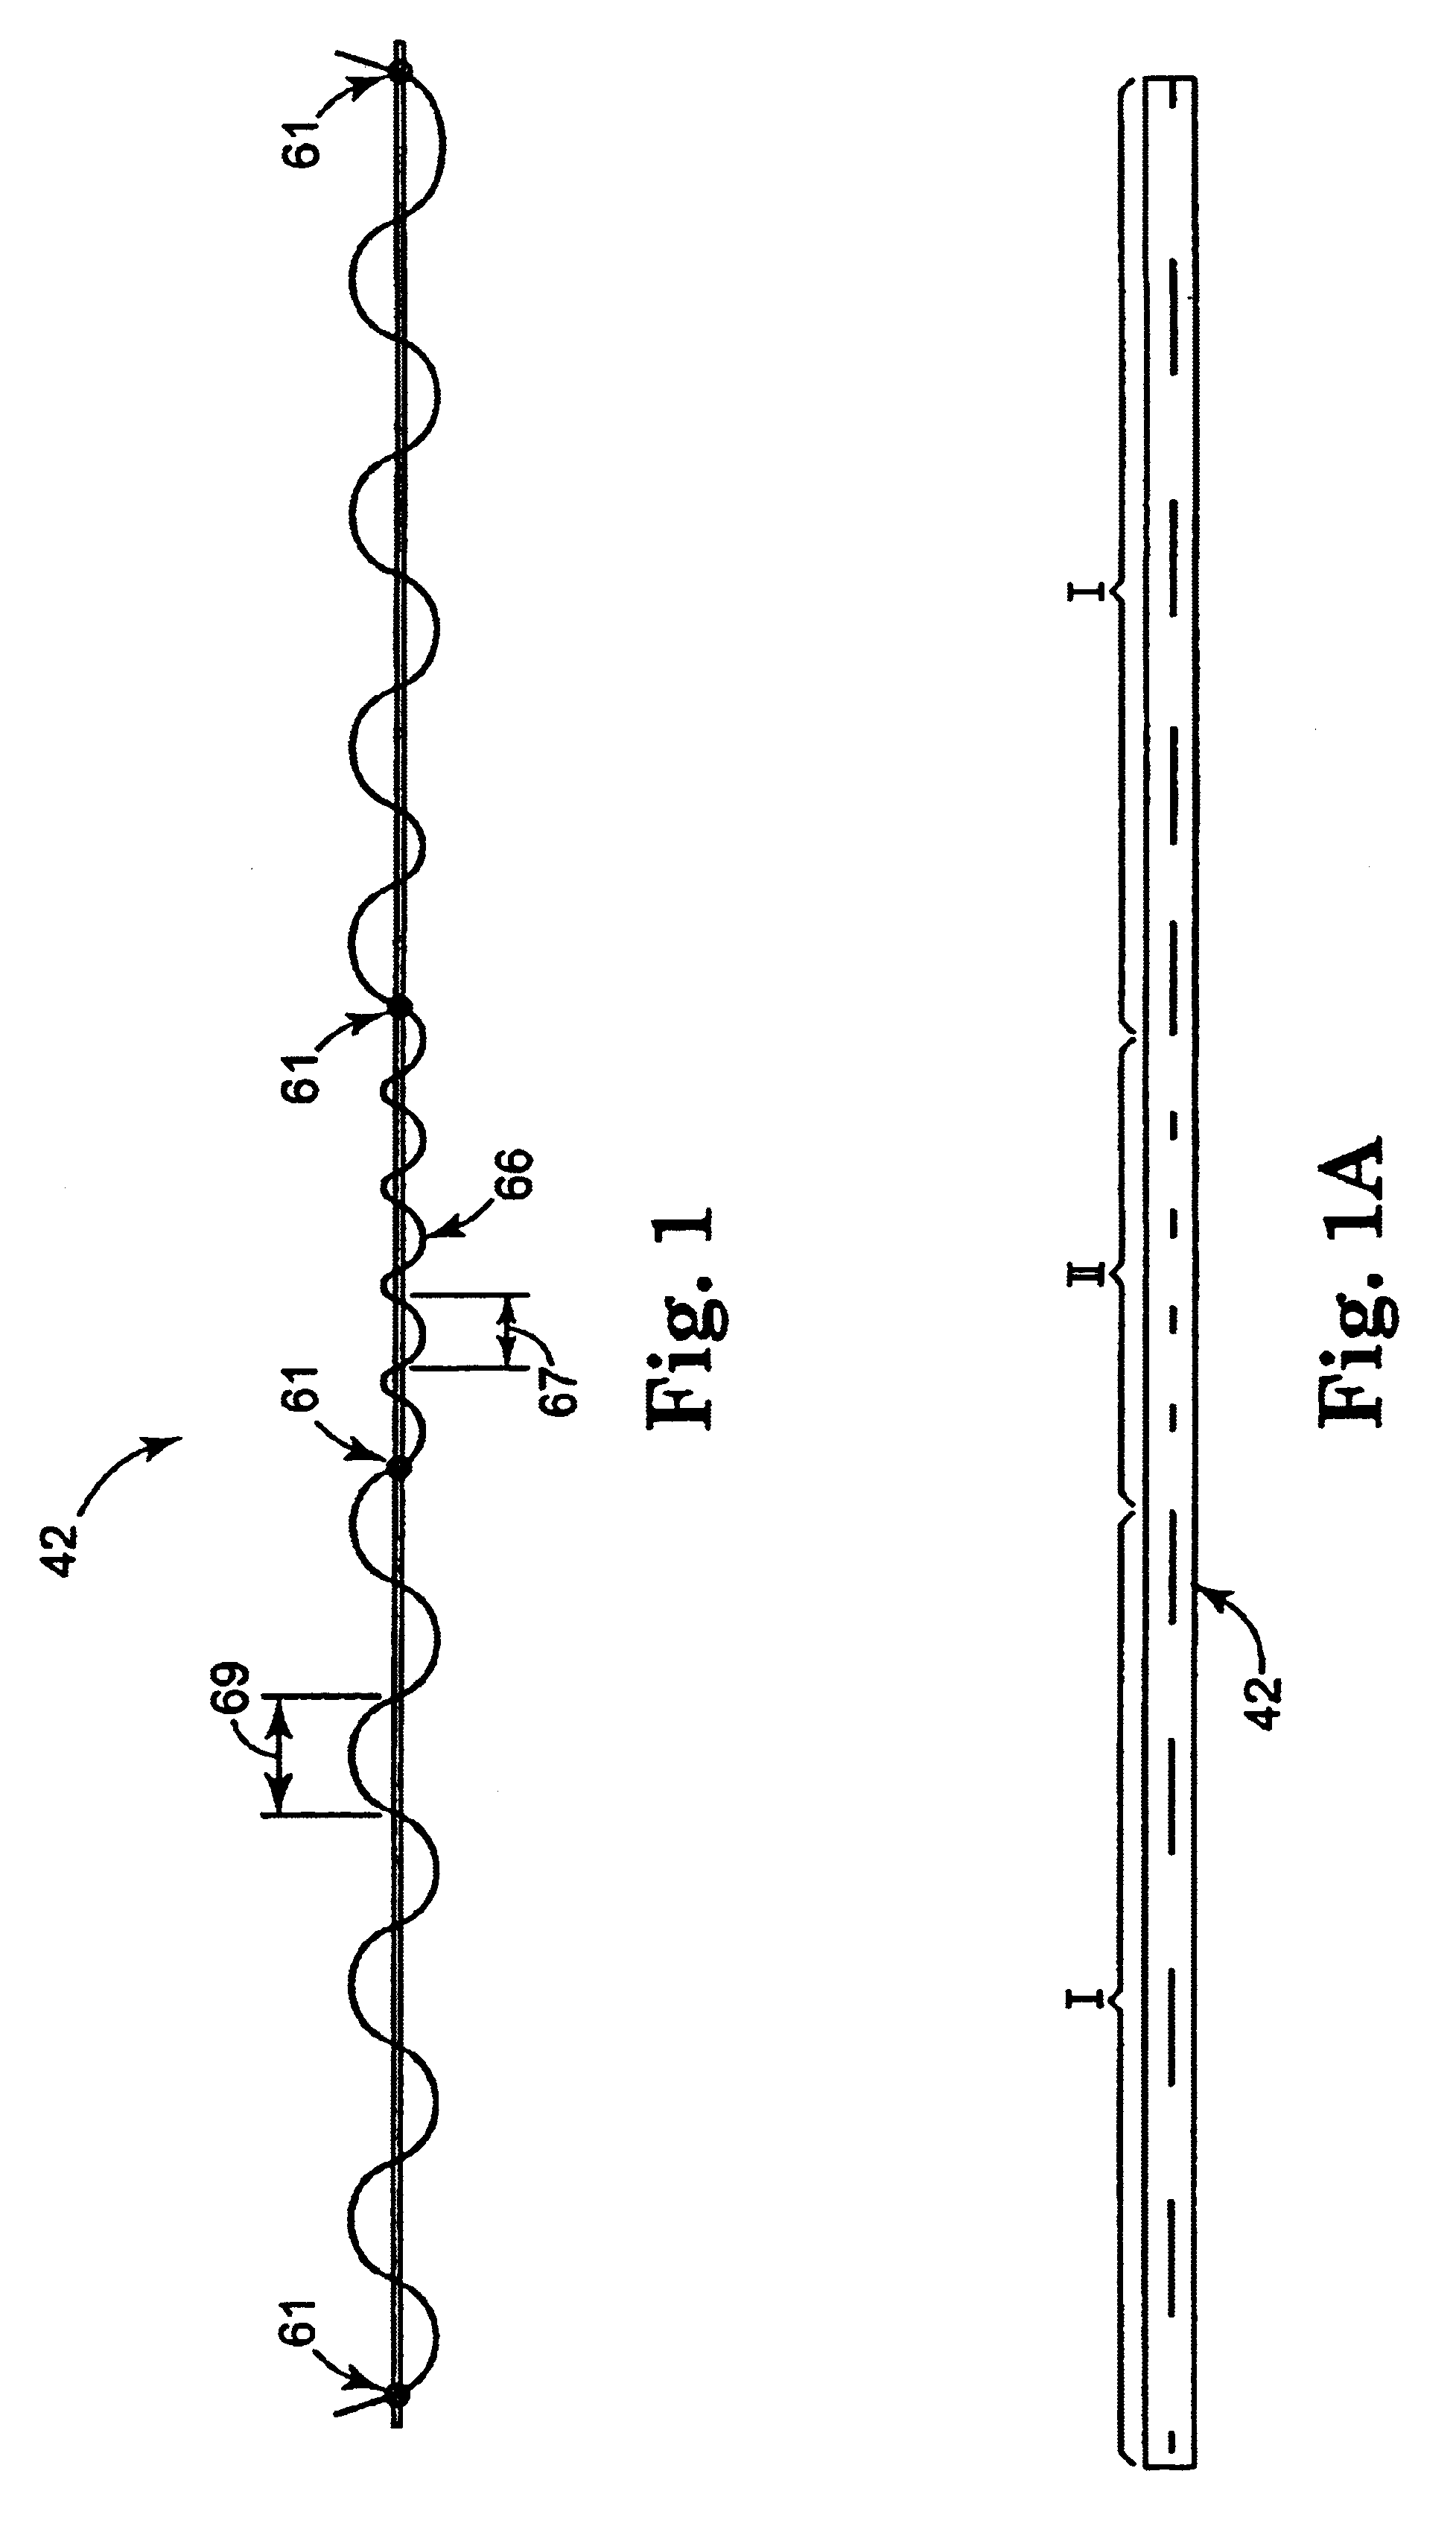 Implantable article and method for treating urinary incontinence using means for repositioning the implantable article